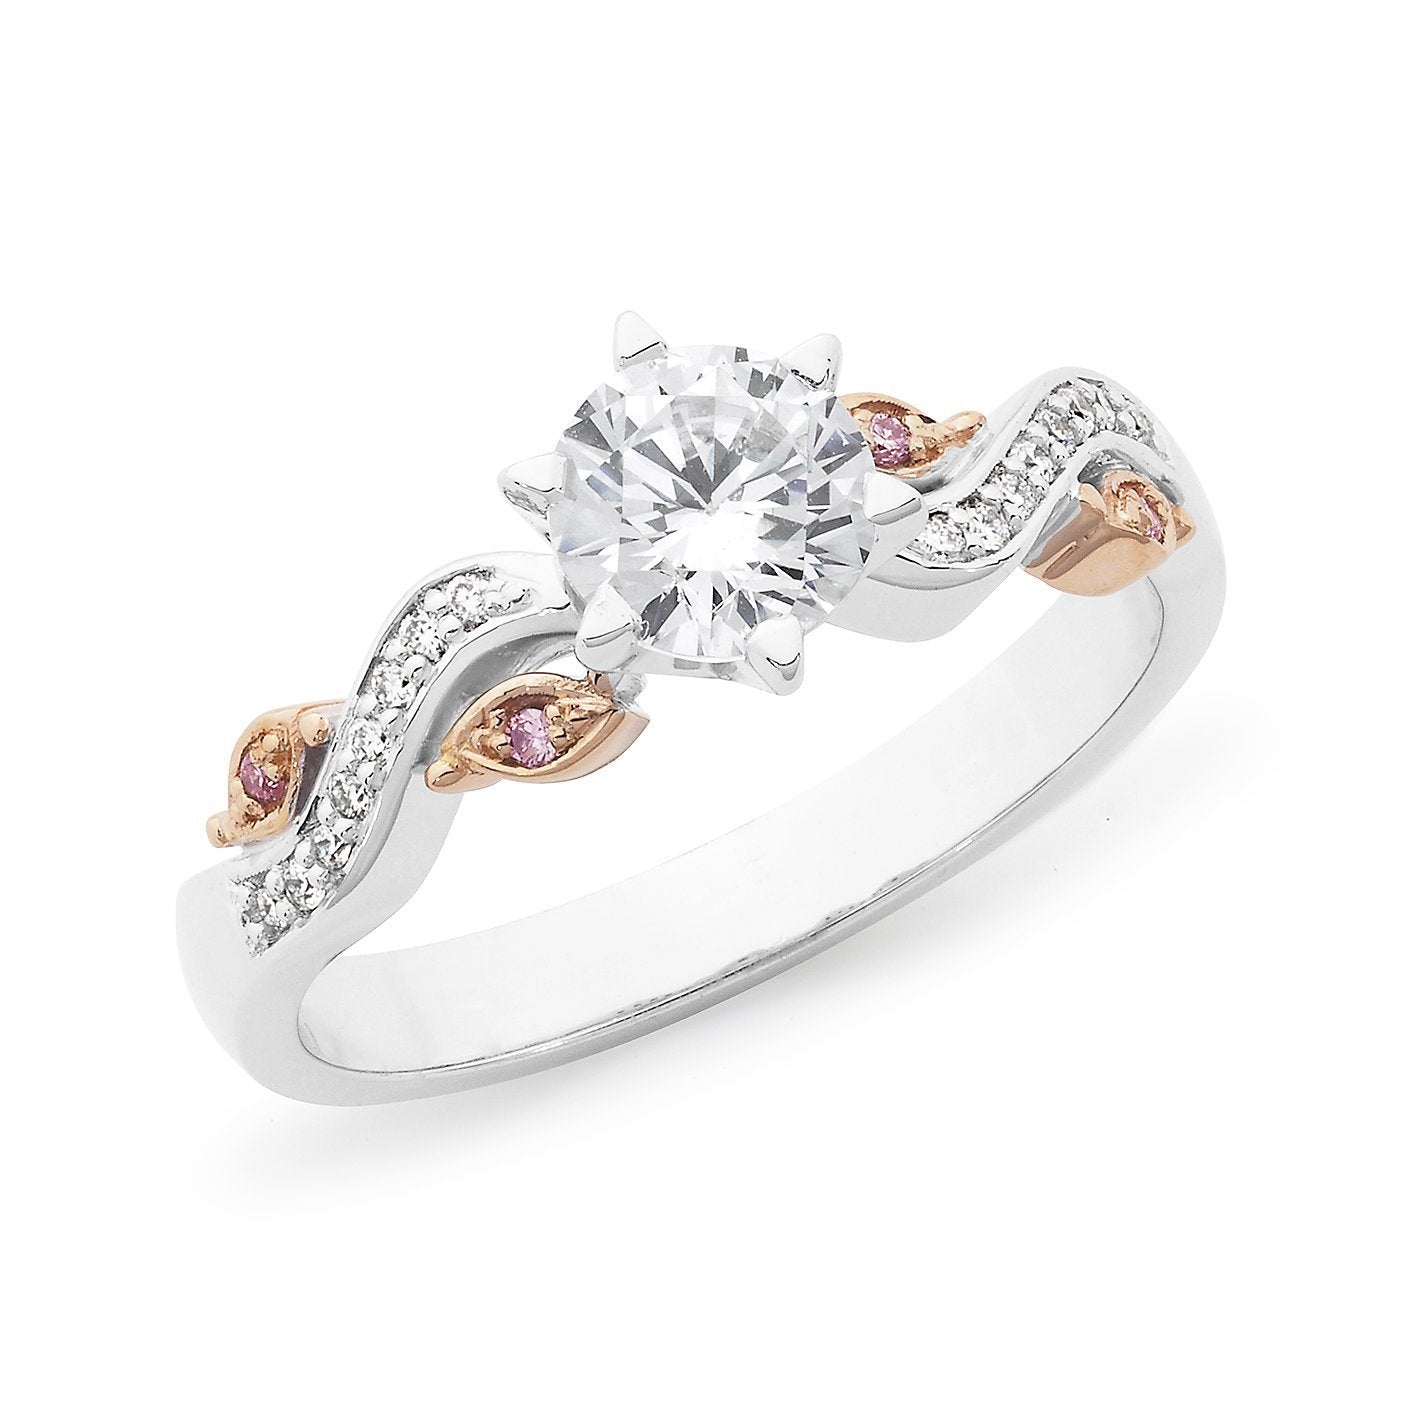 PINK CAVIAR 0.80ct White Round Brilliant & Pink Diamond Engagement Ring in 18ct White Gold